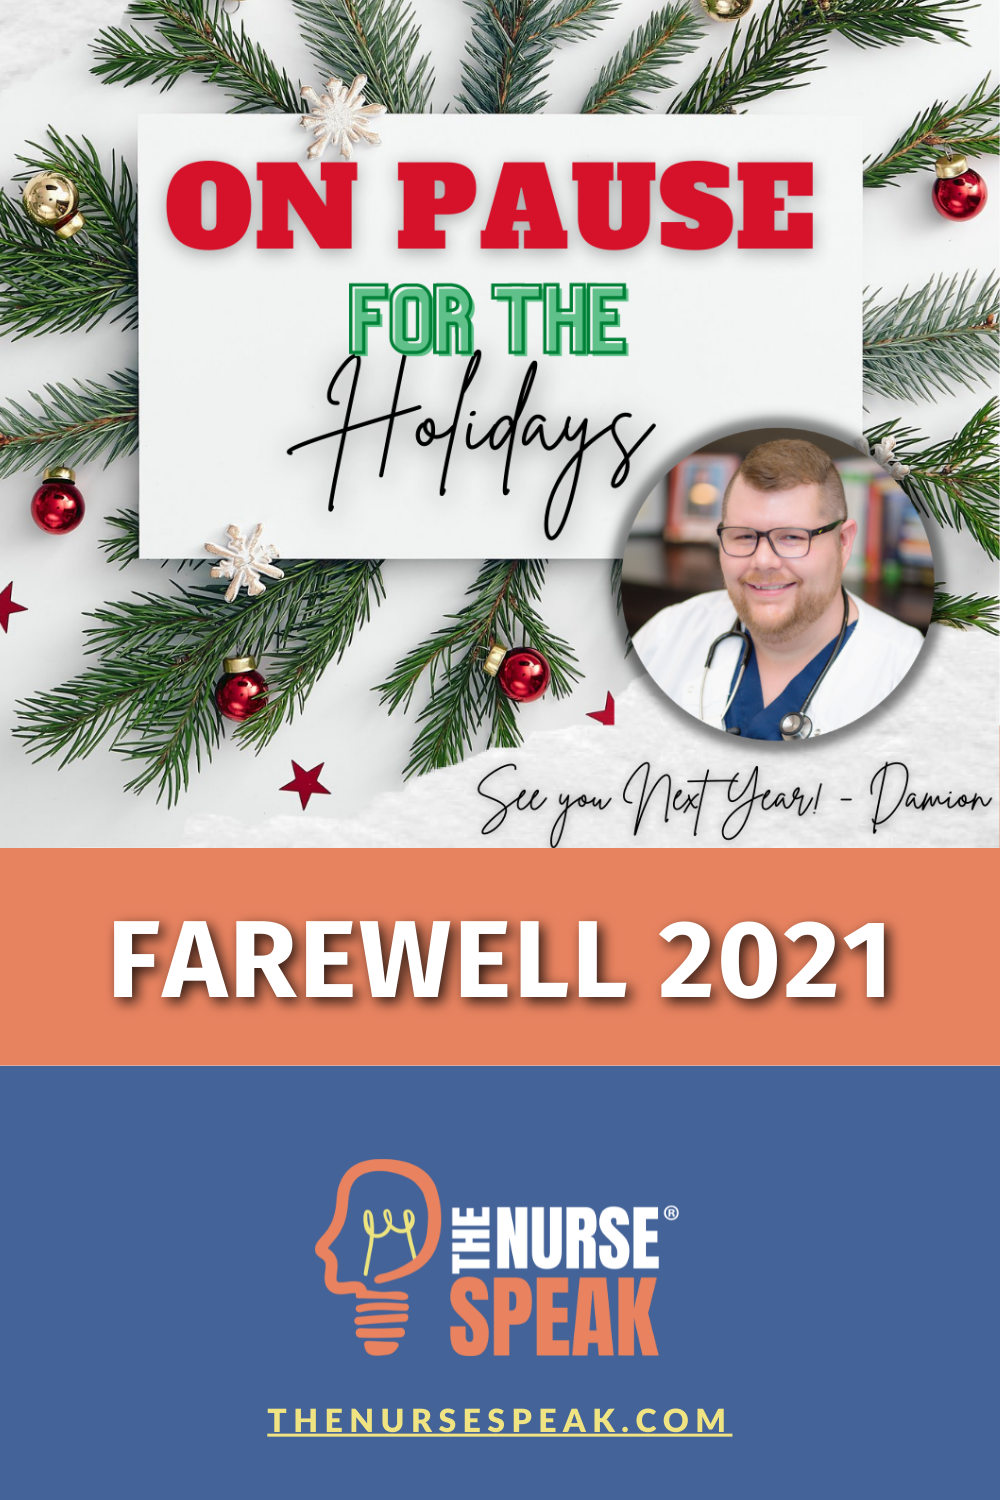 On Pause for the Holidays! Farewell 2021